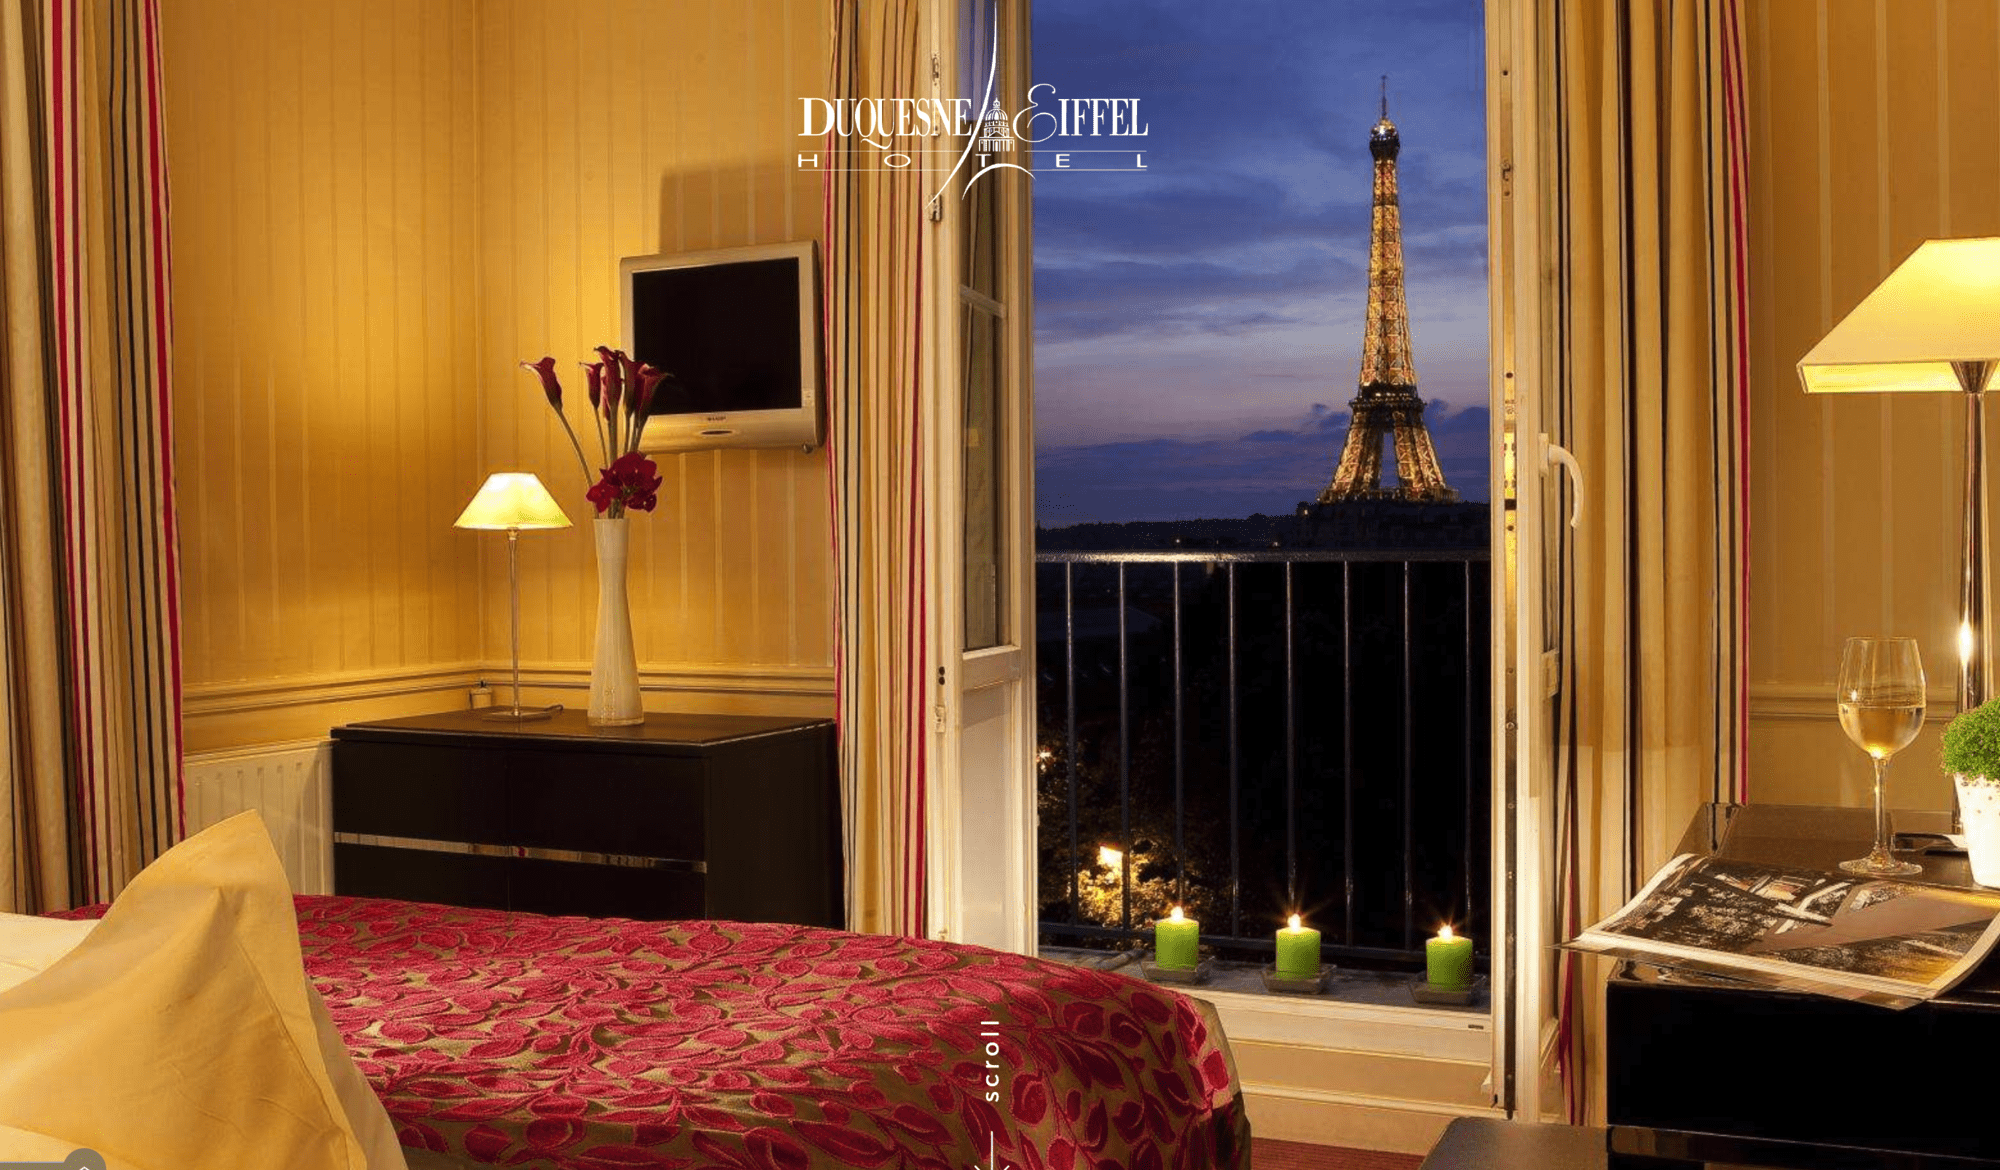 Hotel Duquesne: Three Star hotel with a view of the Eiffel Tower in Paris